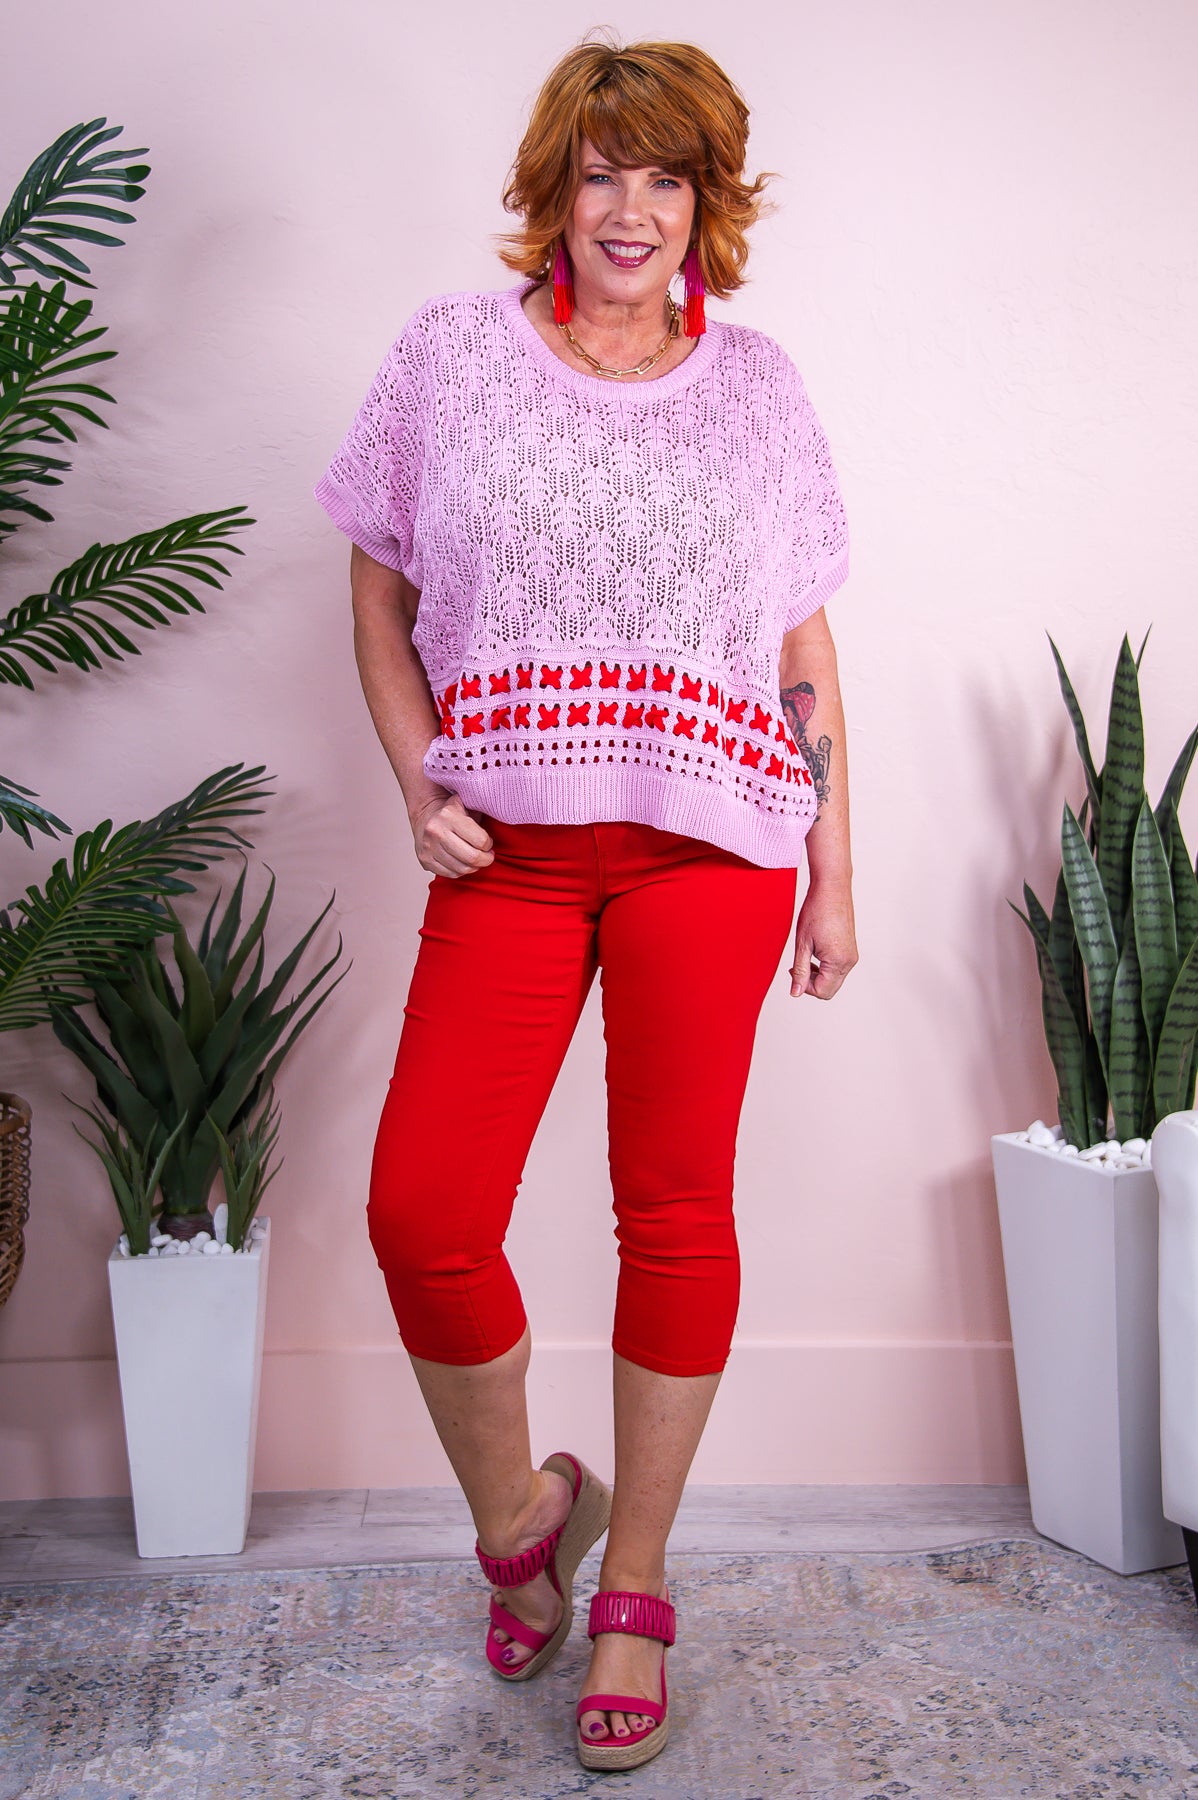 Pages Of Life Pink/Red Knitted Top - T9329PK